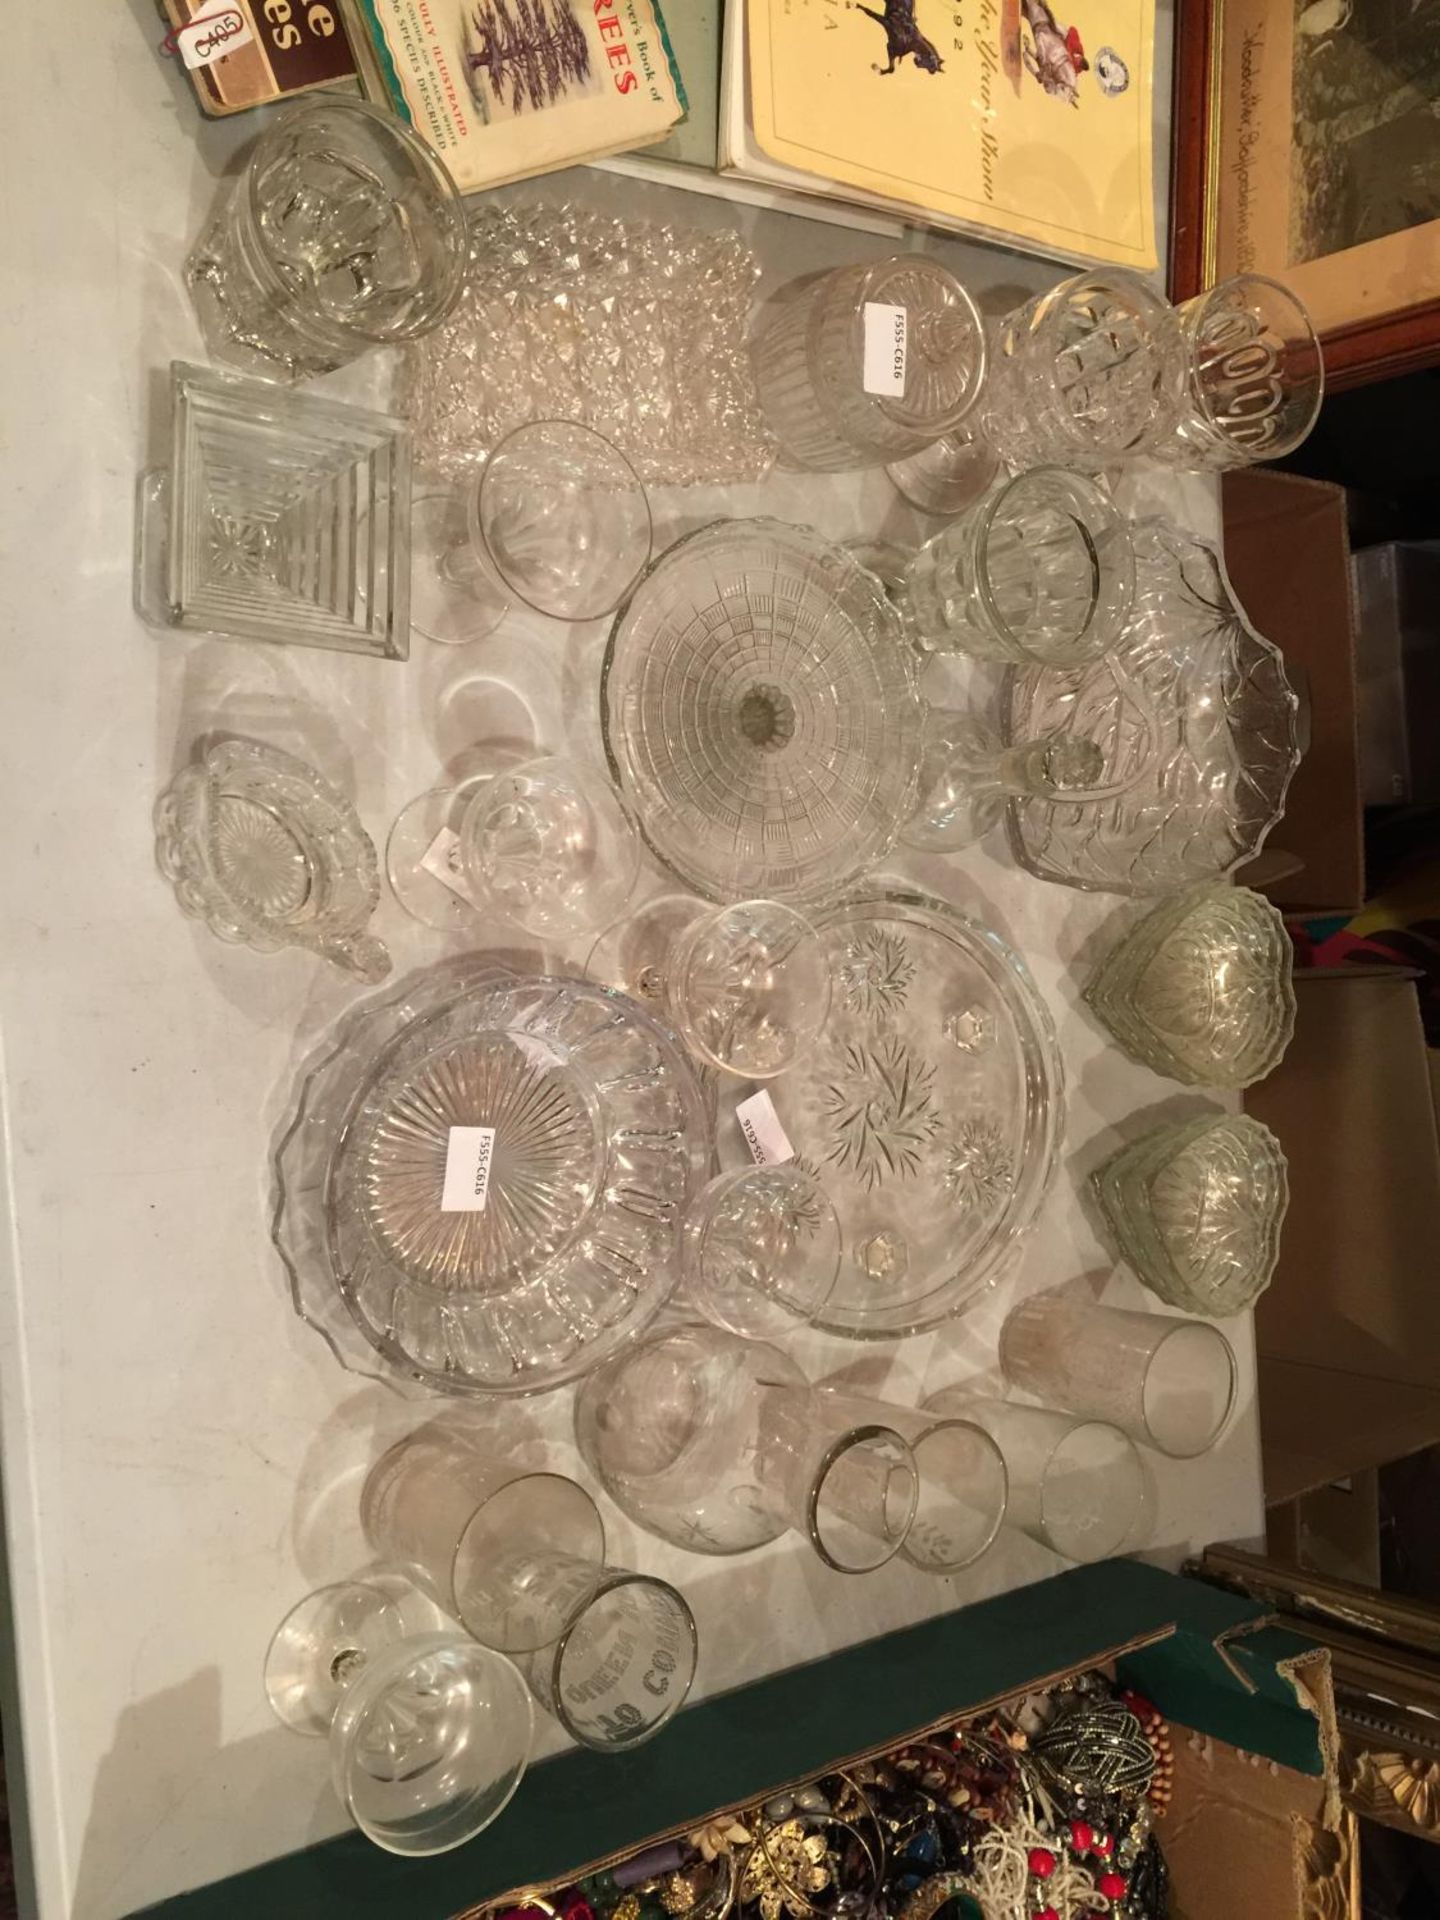 A LARGE AMOUNT OF CLEAR GLASSWARE TO INCLUDE HEART SHAPED DISHES, COMMEMORATIVE TUMBLERS, CAKE